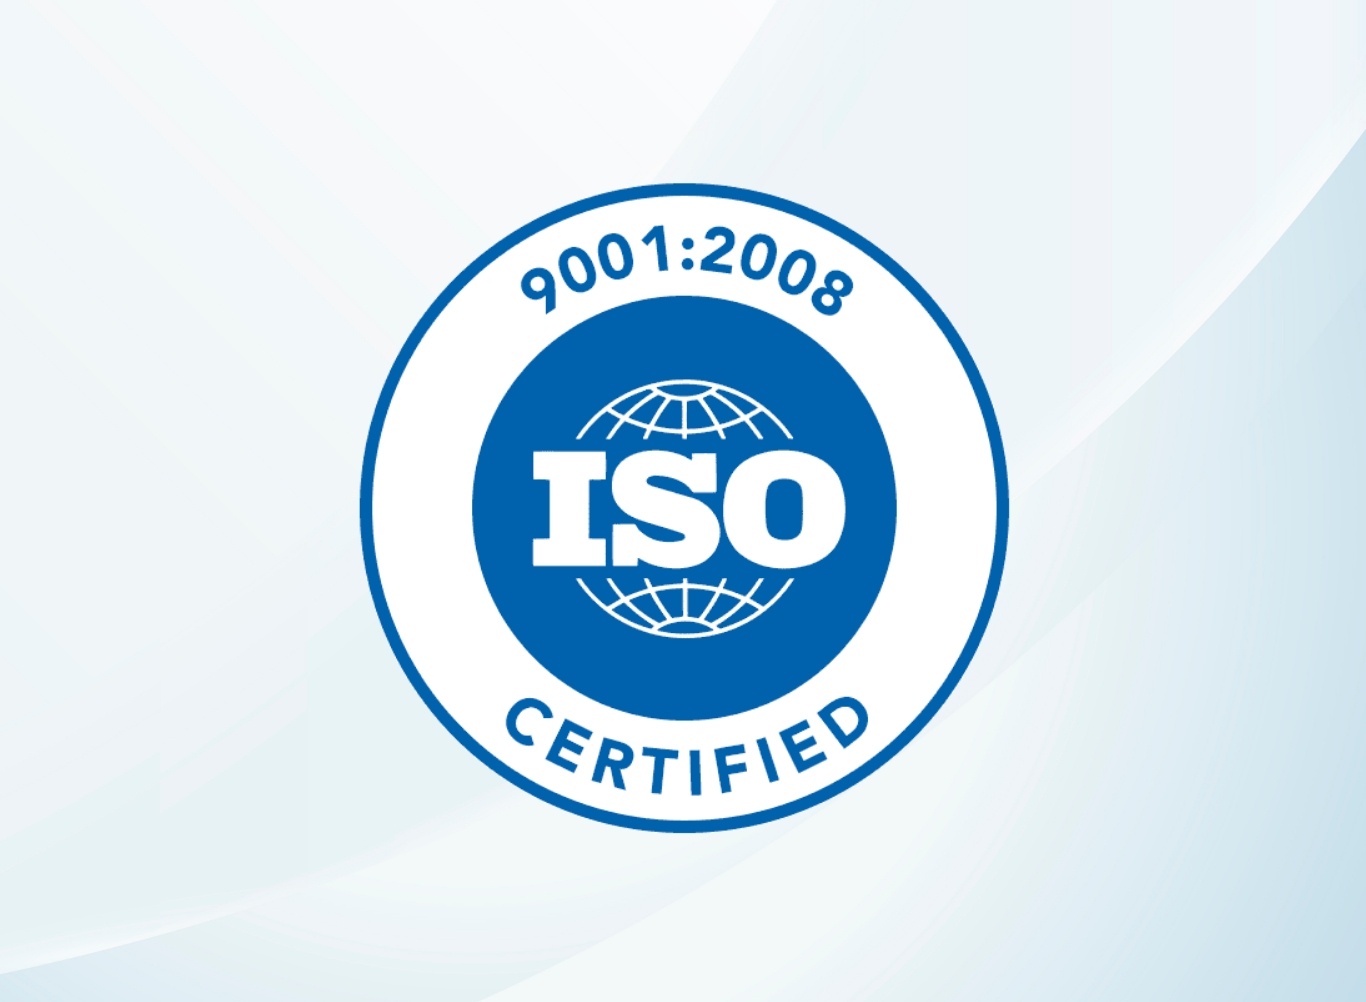 Certificate ISO 9001:2008.